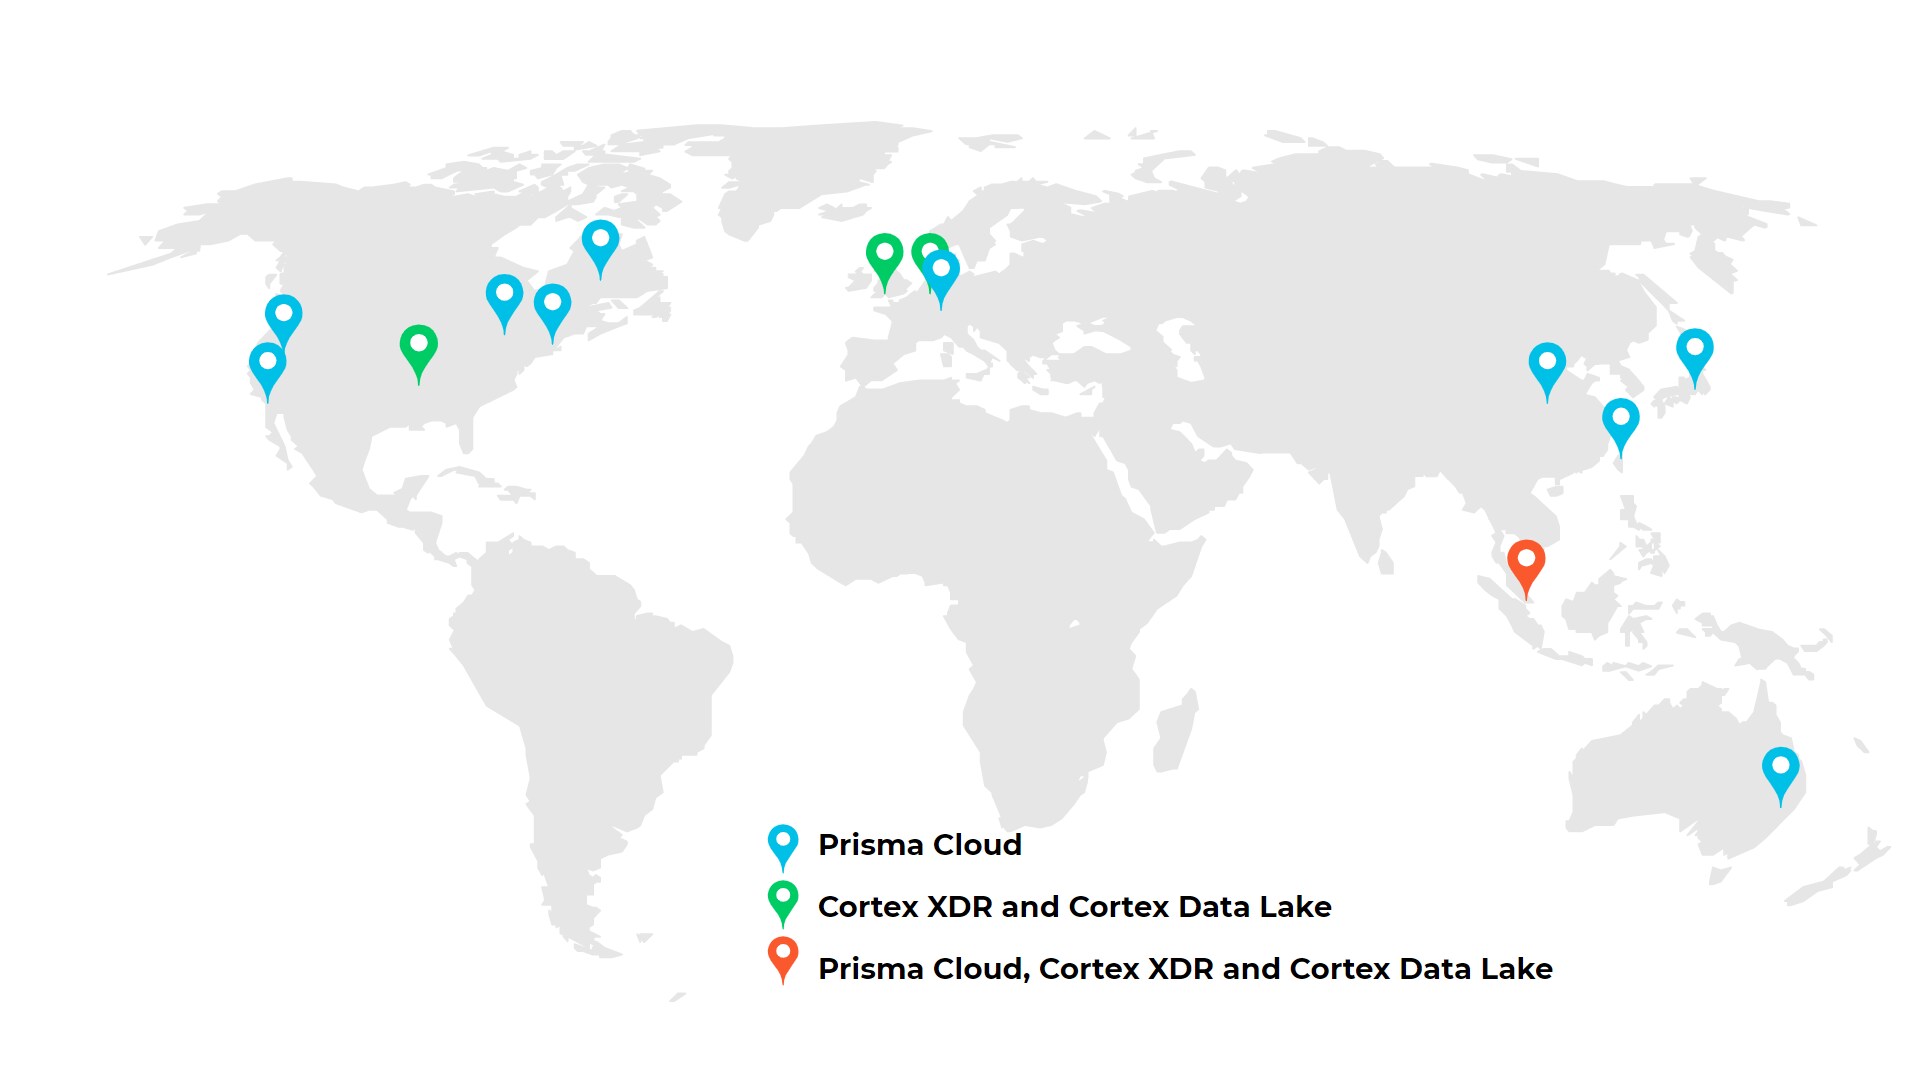 This map shows the cloud hosting locations for Prisma Cloud, Cortex XDR and Cortex Data Lake, including a new Singapore cloud hosting location.